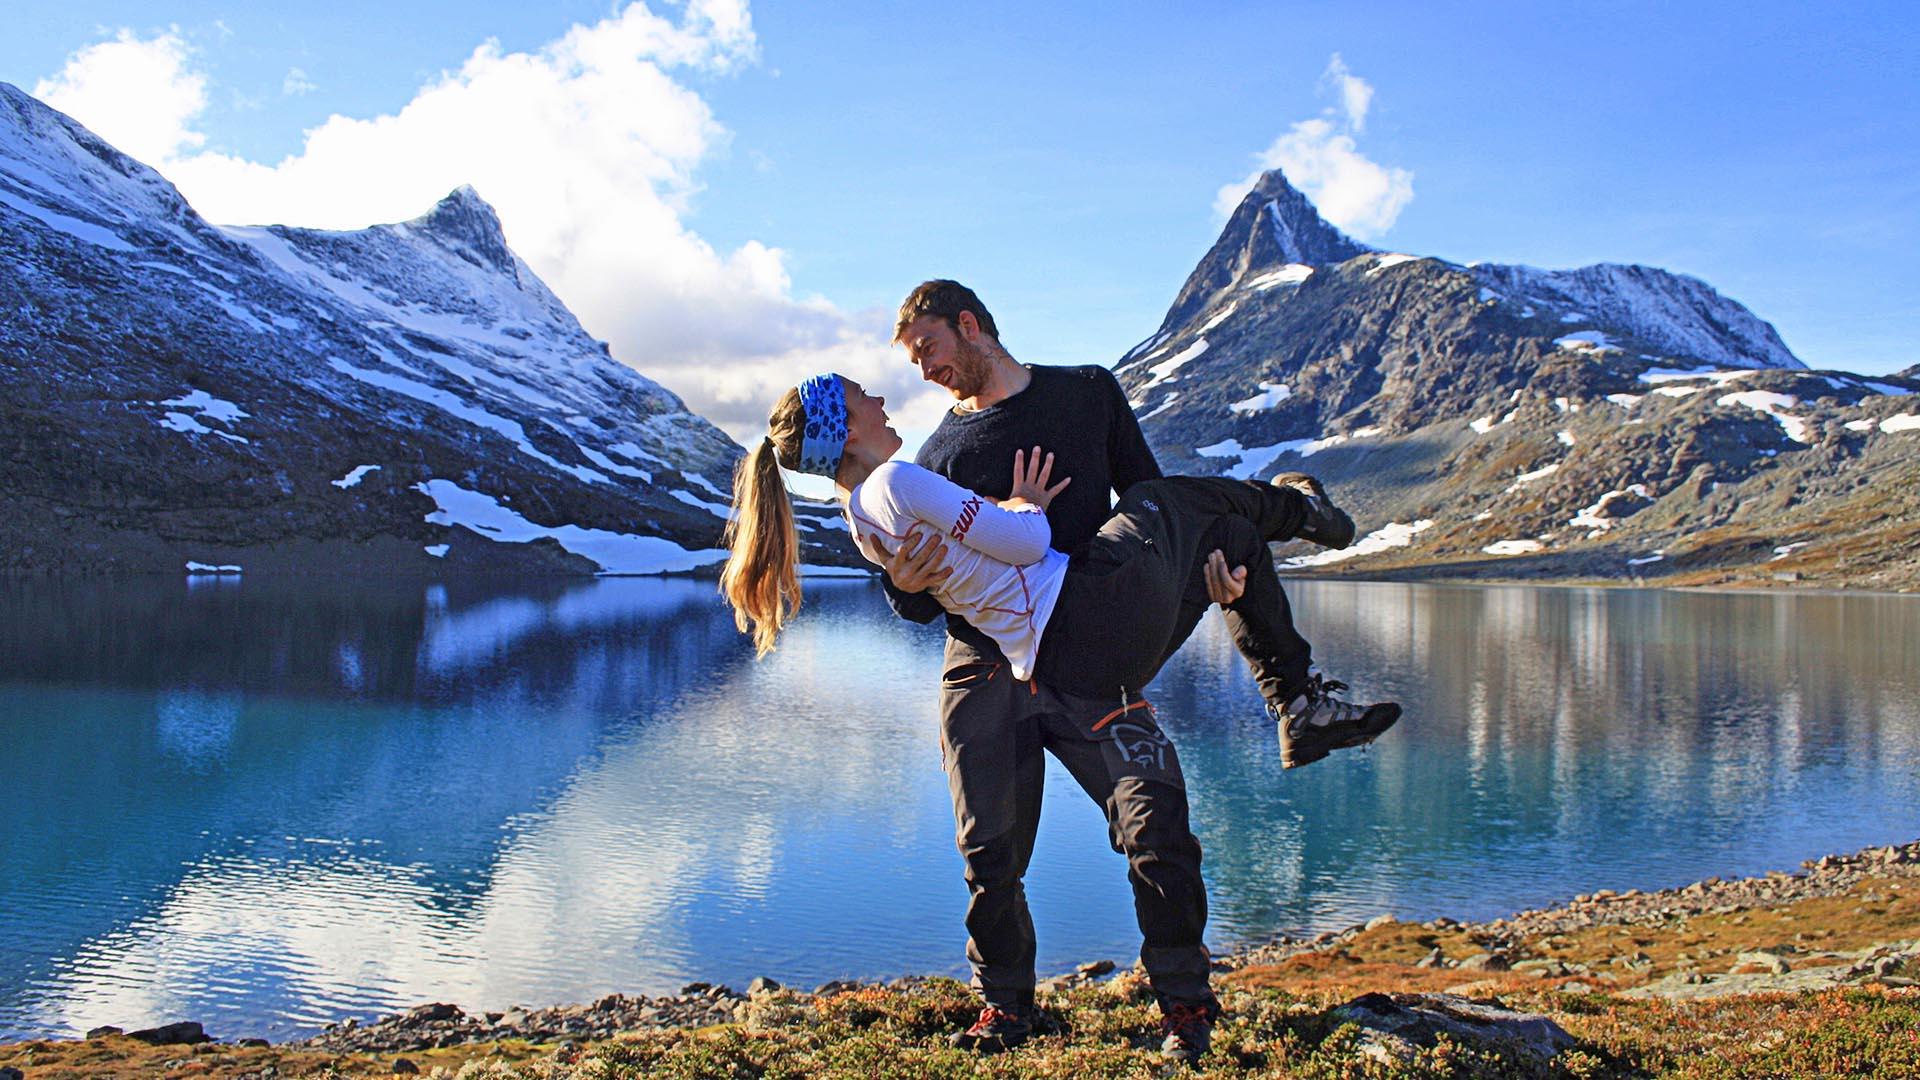 Man is carrying a woman in front of a lake with mountains in the background.